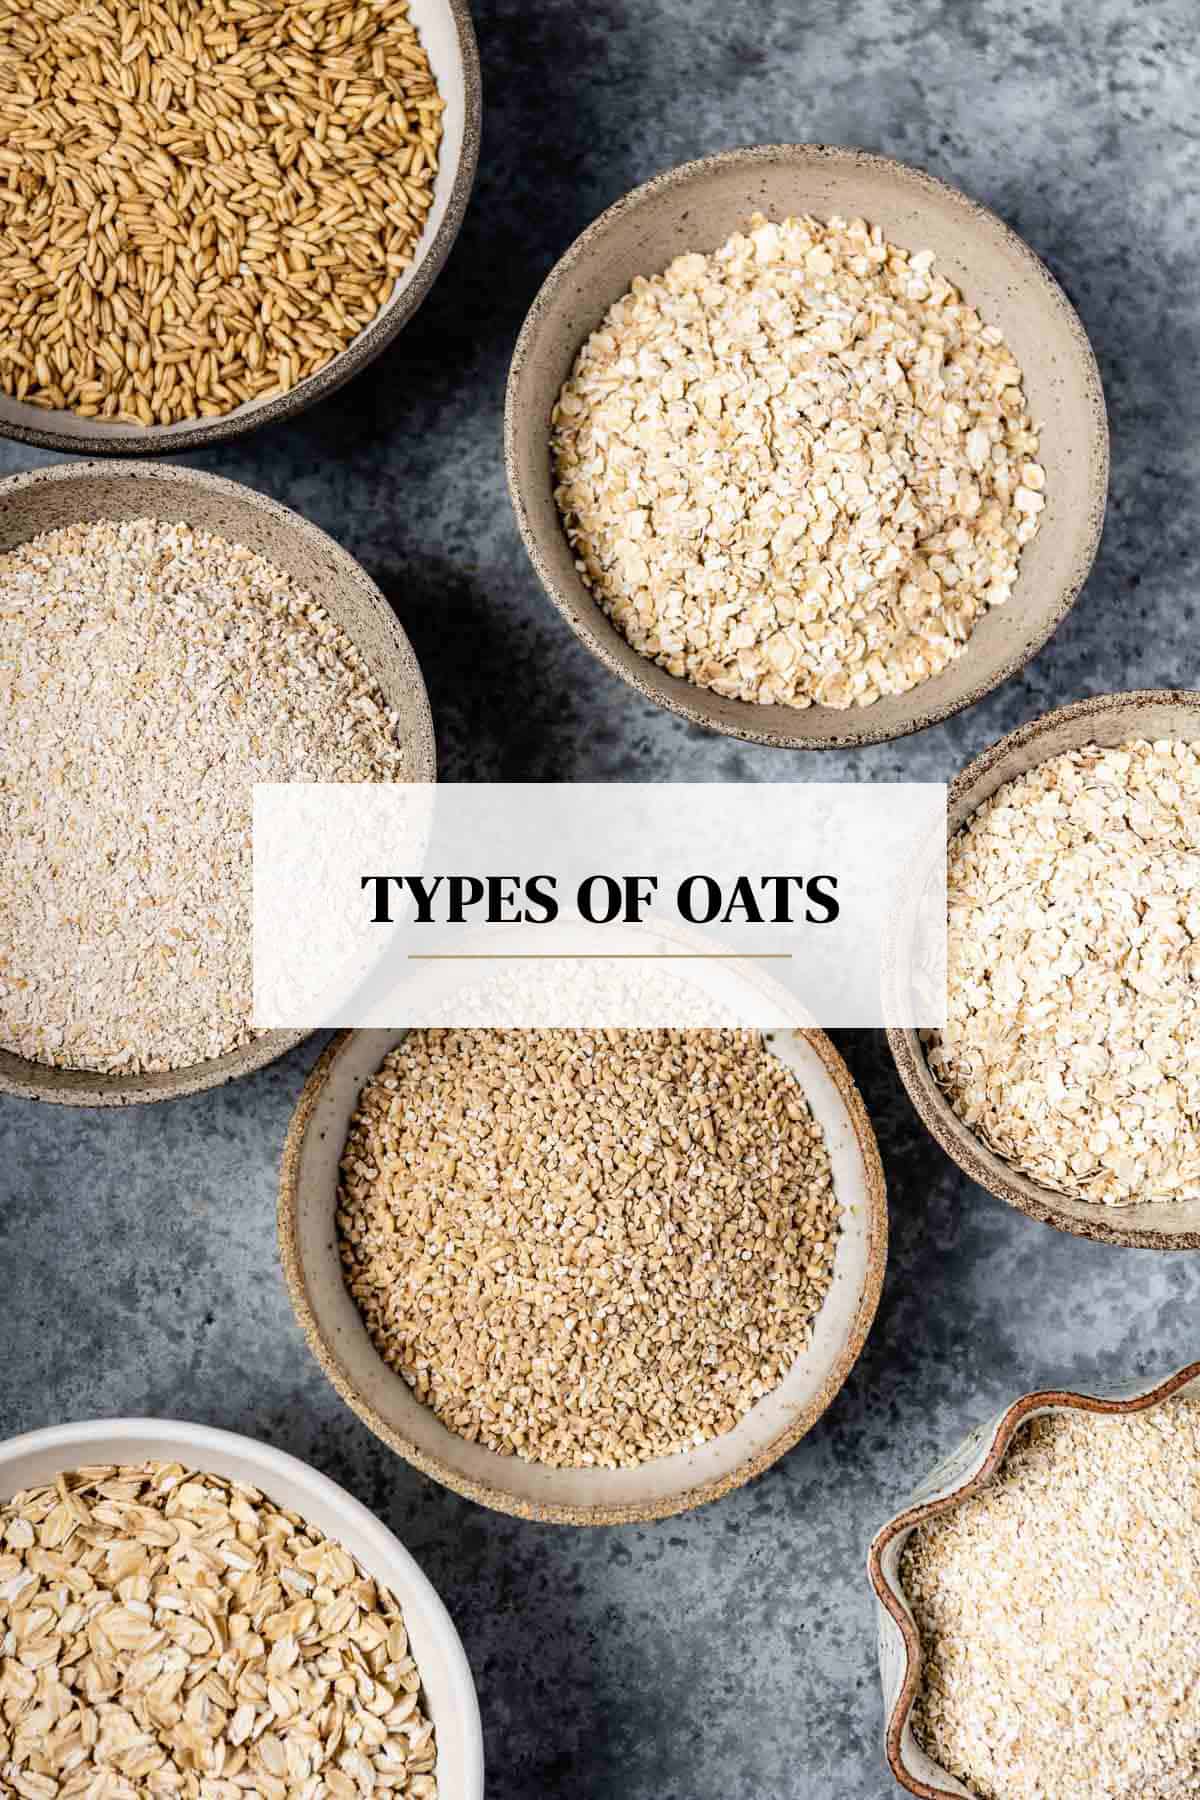 Different types of oats are placed in bowls from the top view.